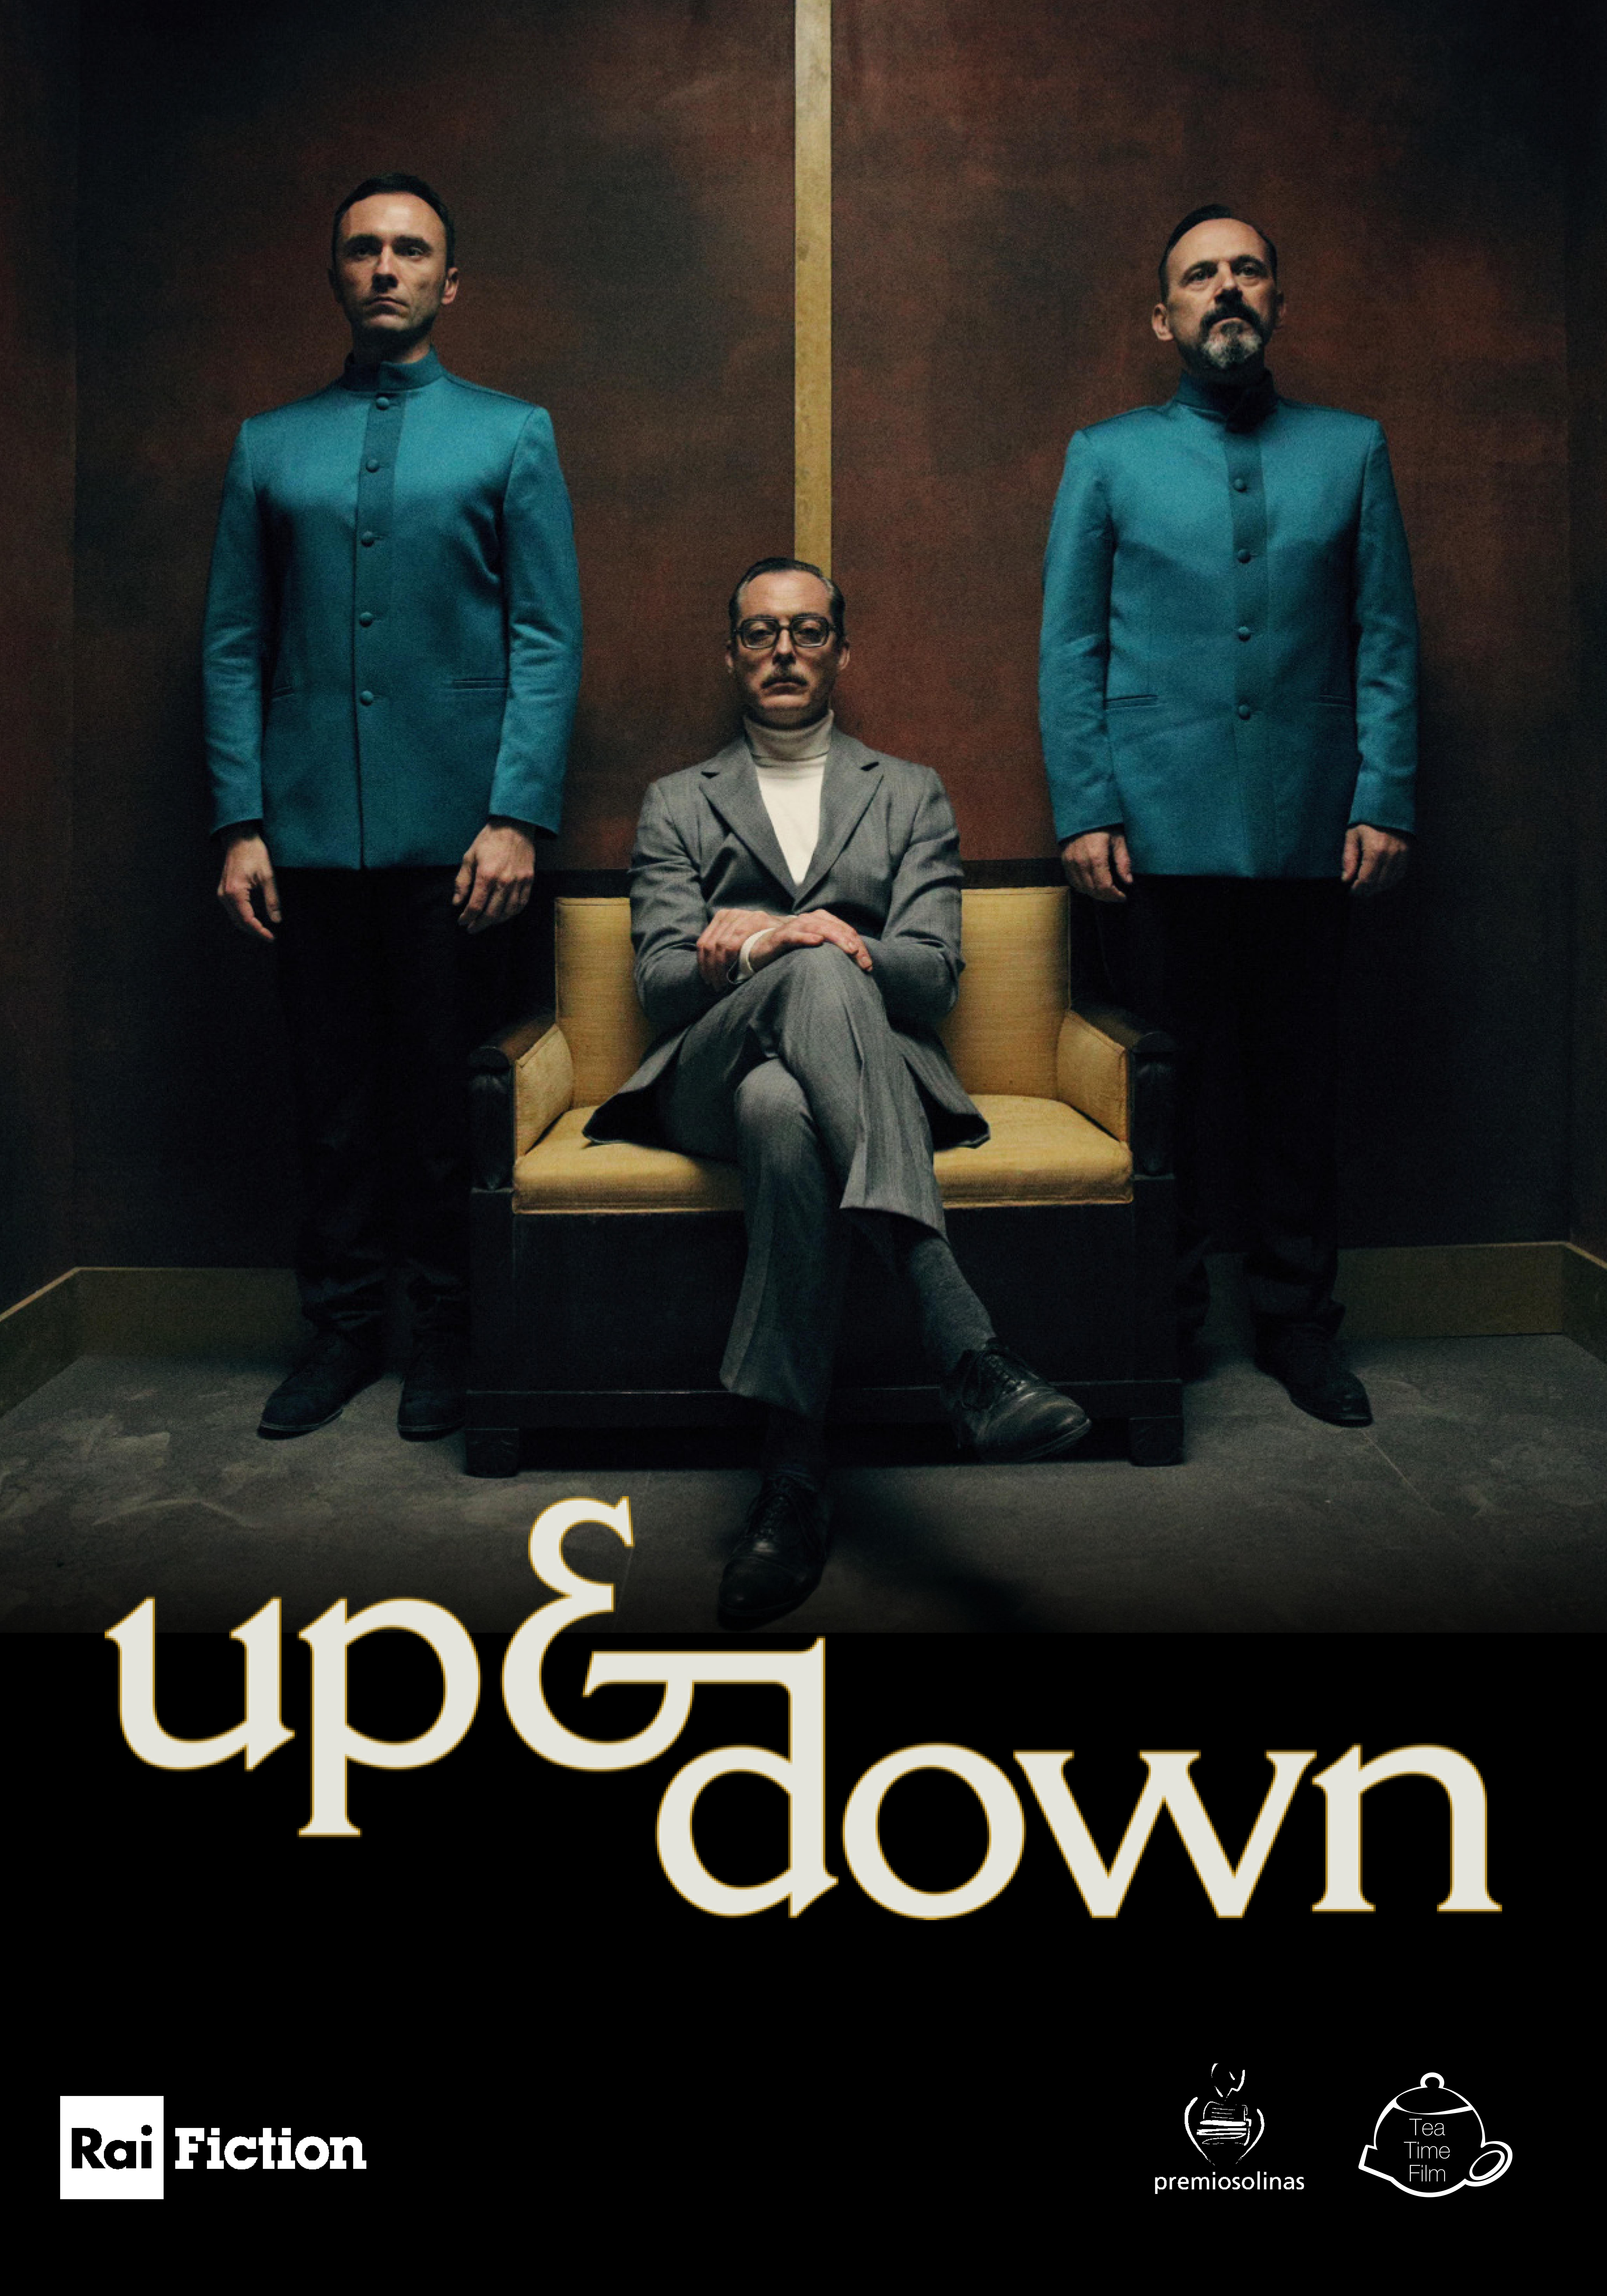 Up&Down